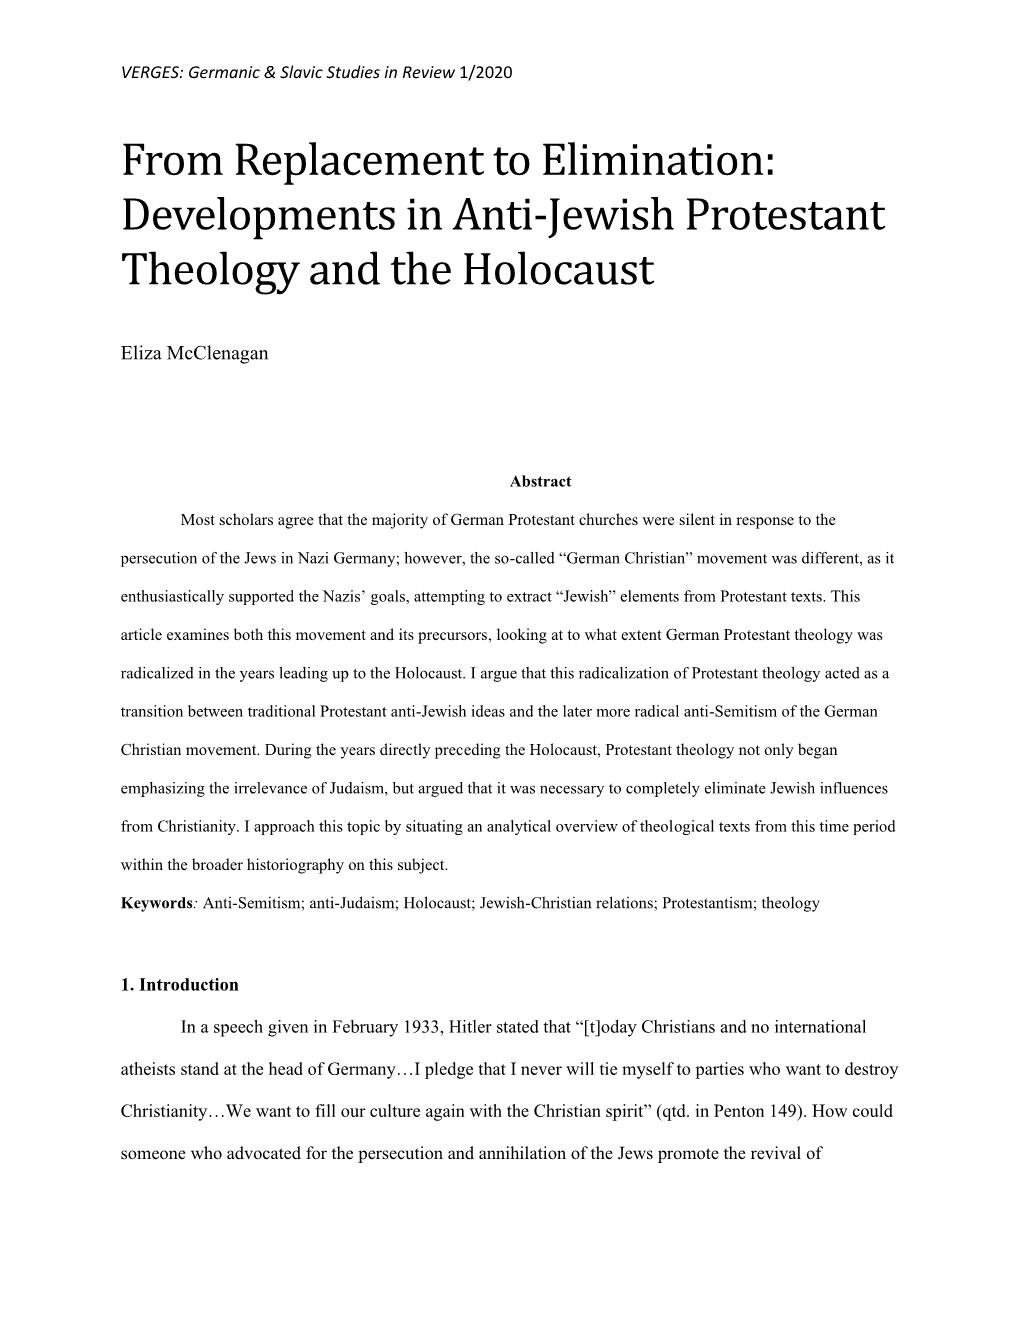 Developments in Anti-Jewish Protestant Theology and the Holocaust